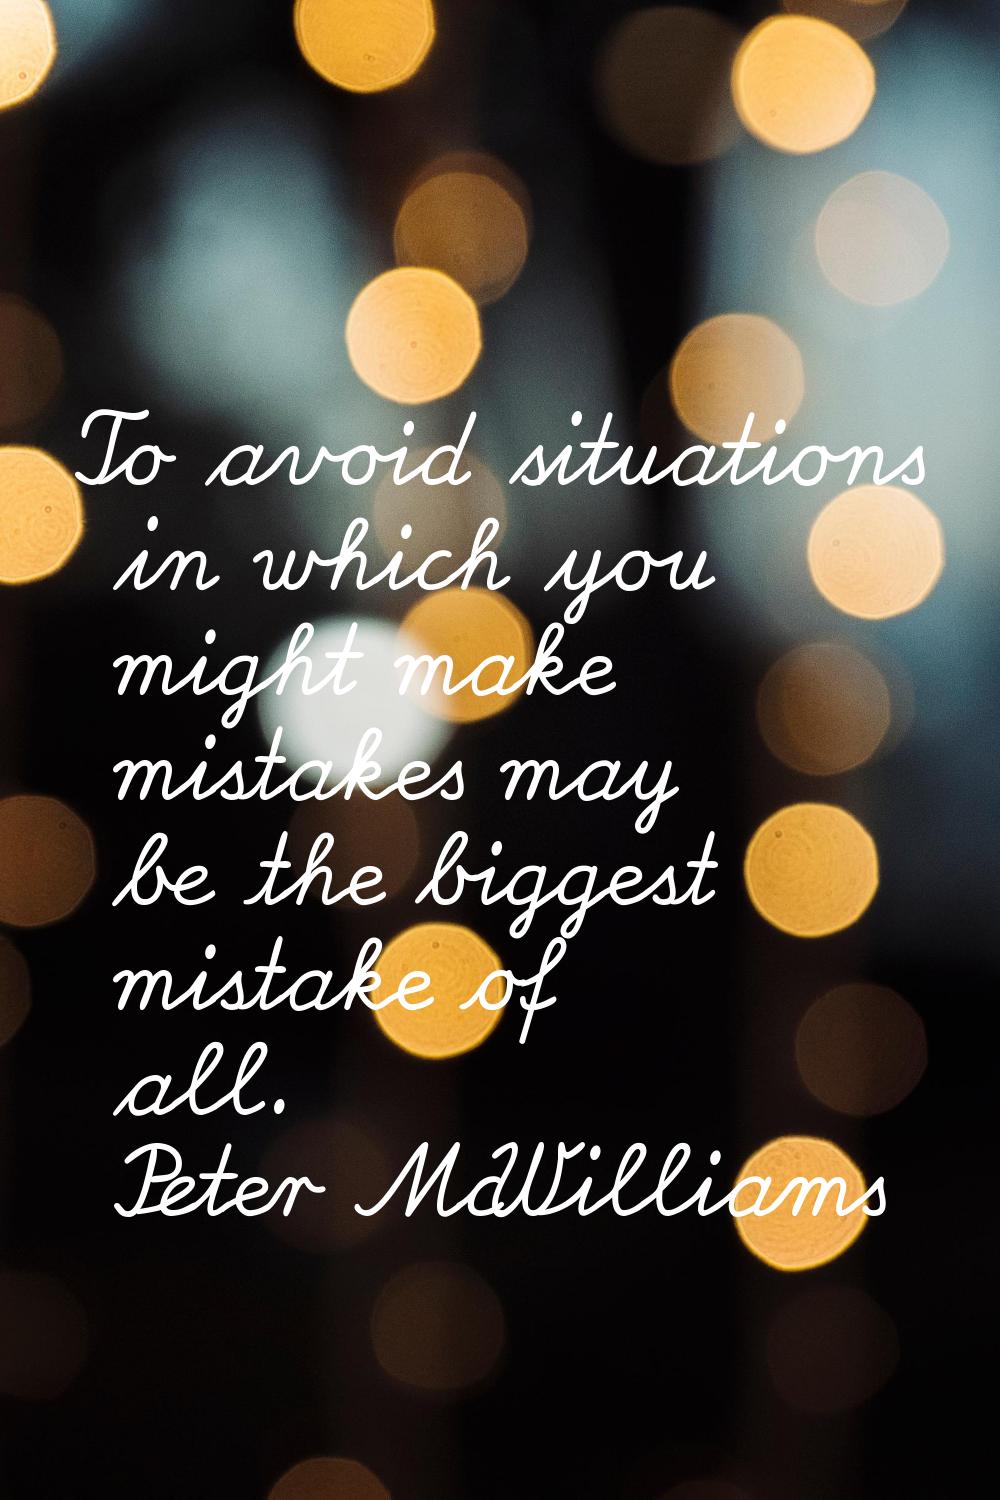 To avoid situations in which you might make mistakes may be the biggest mistake of all.